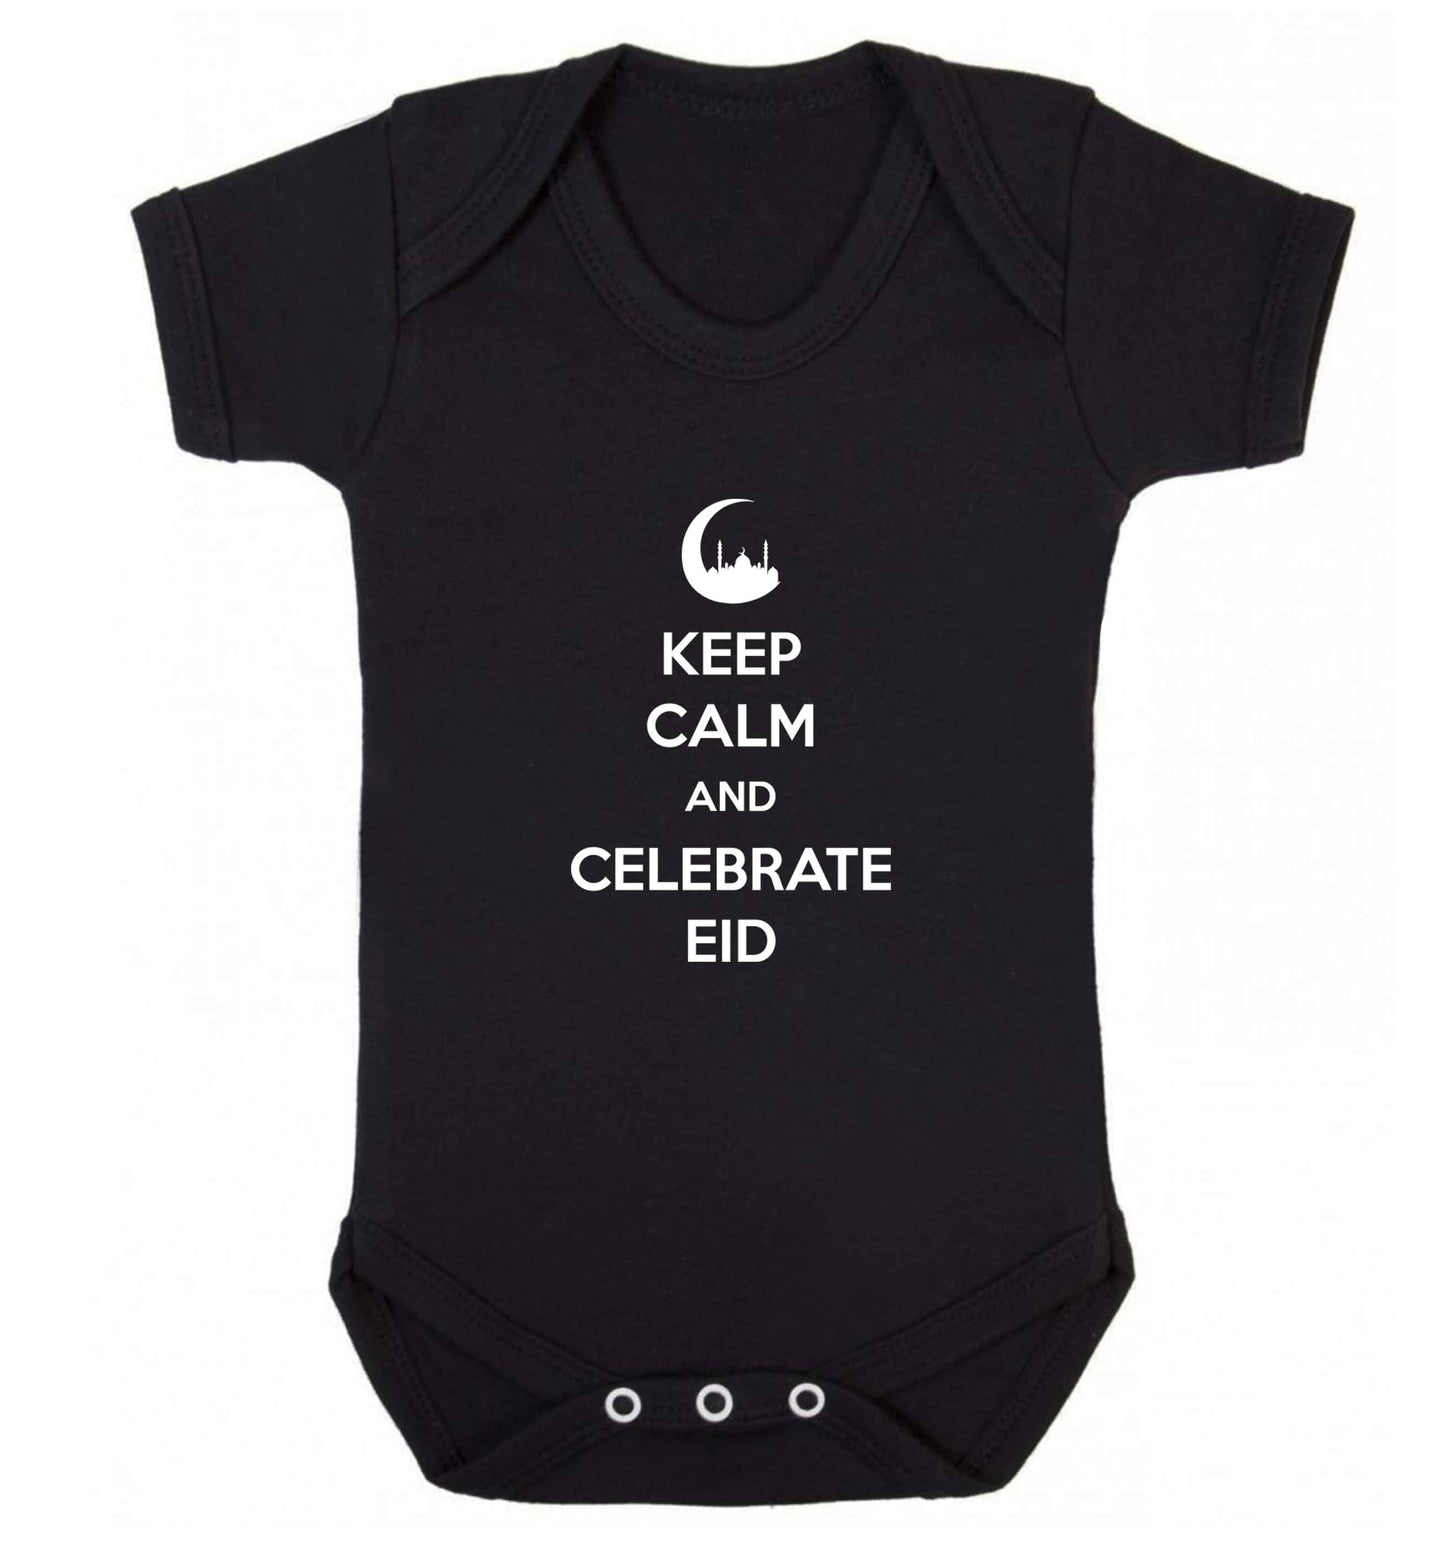 Keep calm and celebrate Eid baby vest black 18-24 months